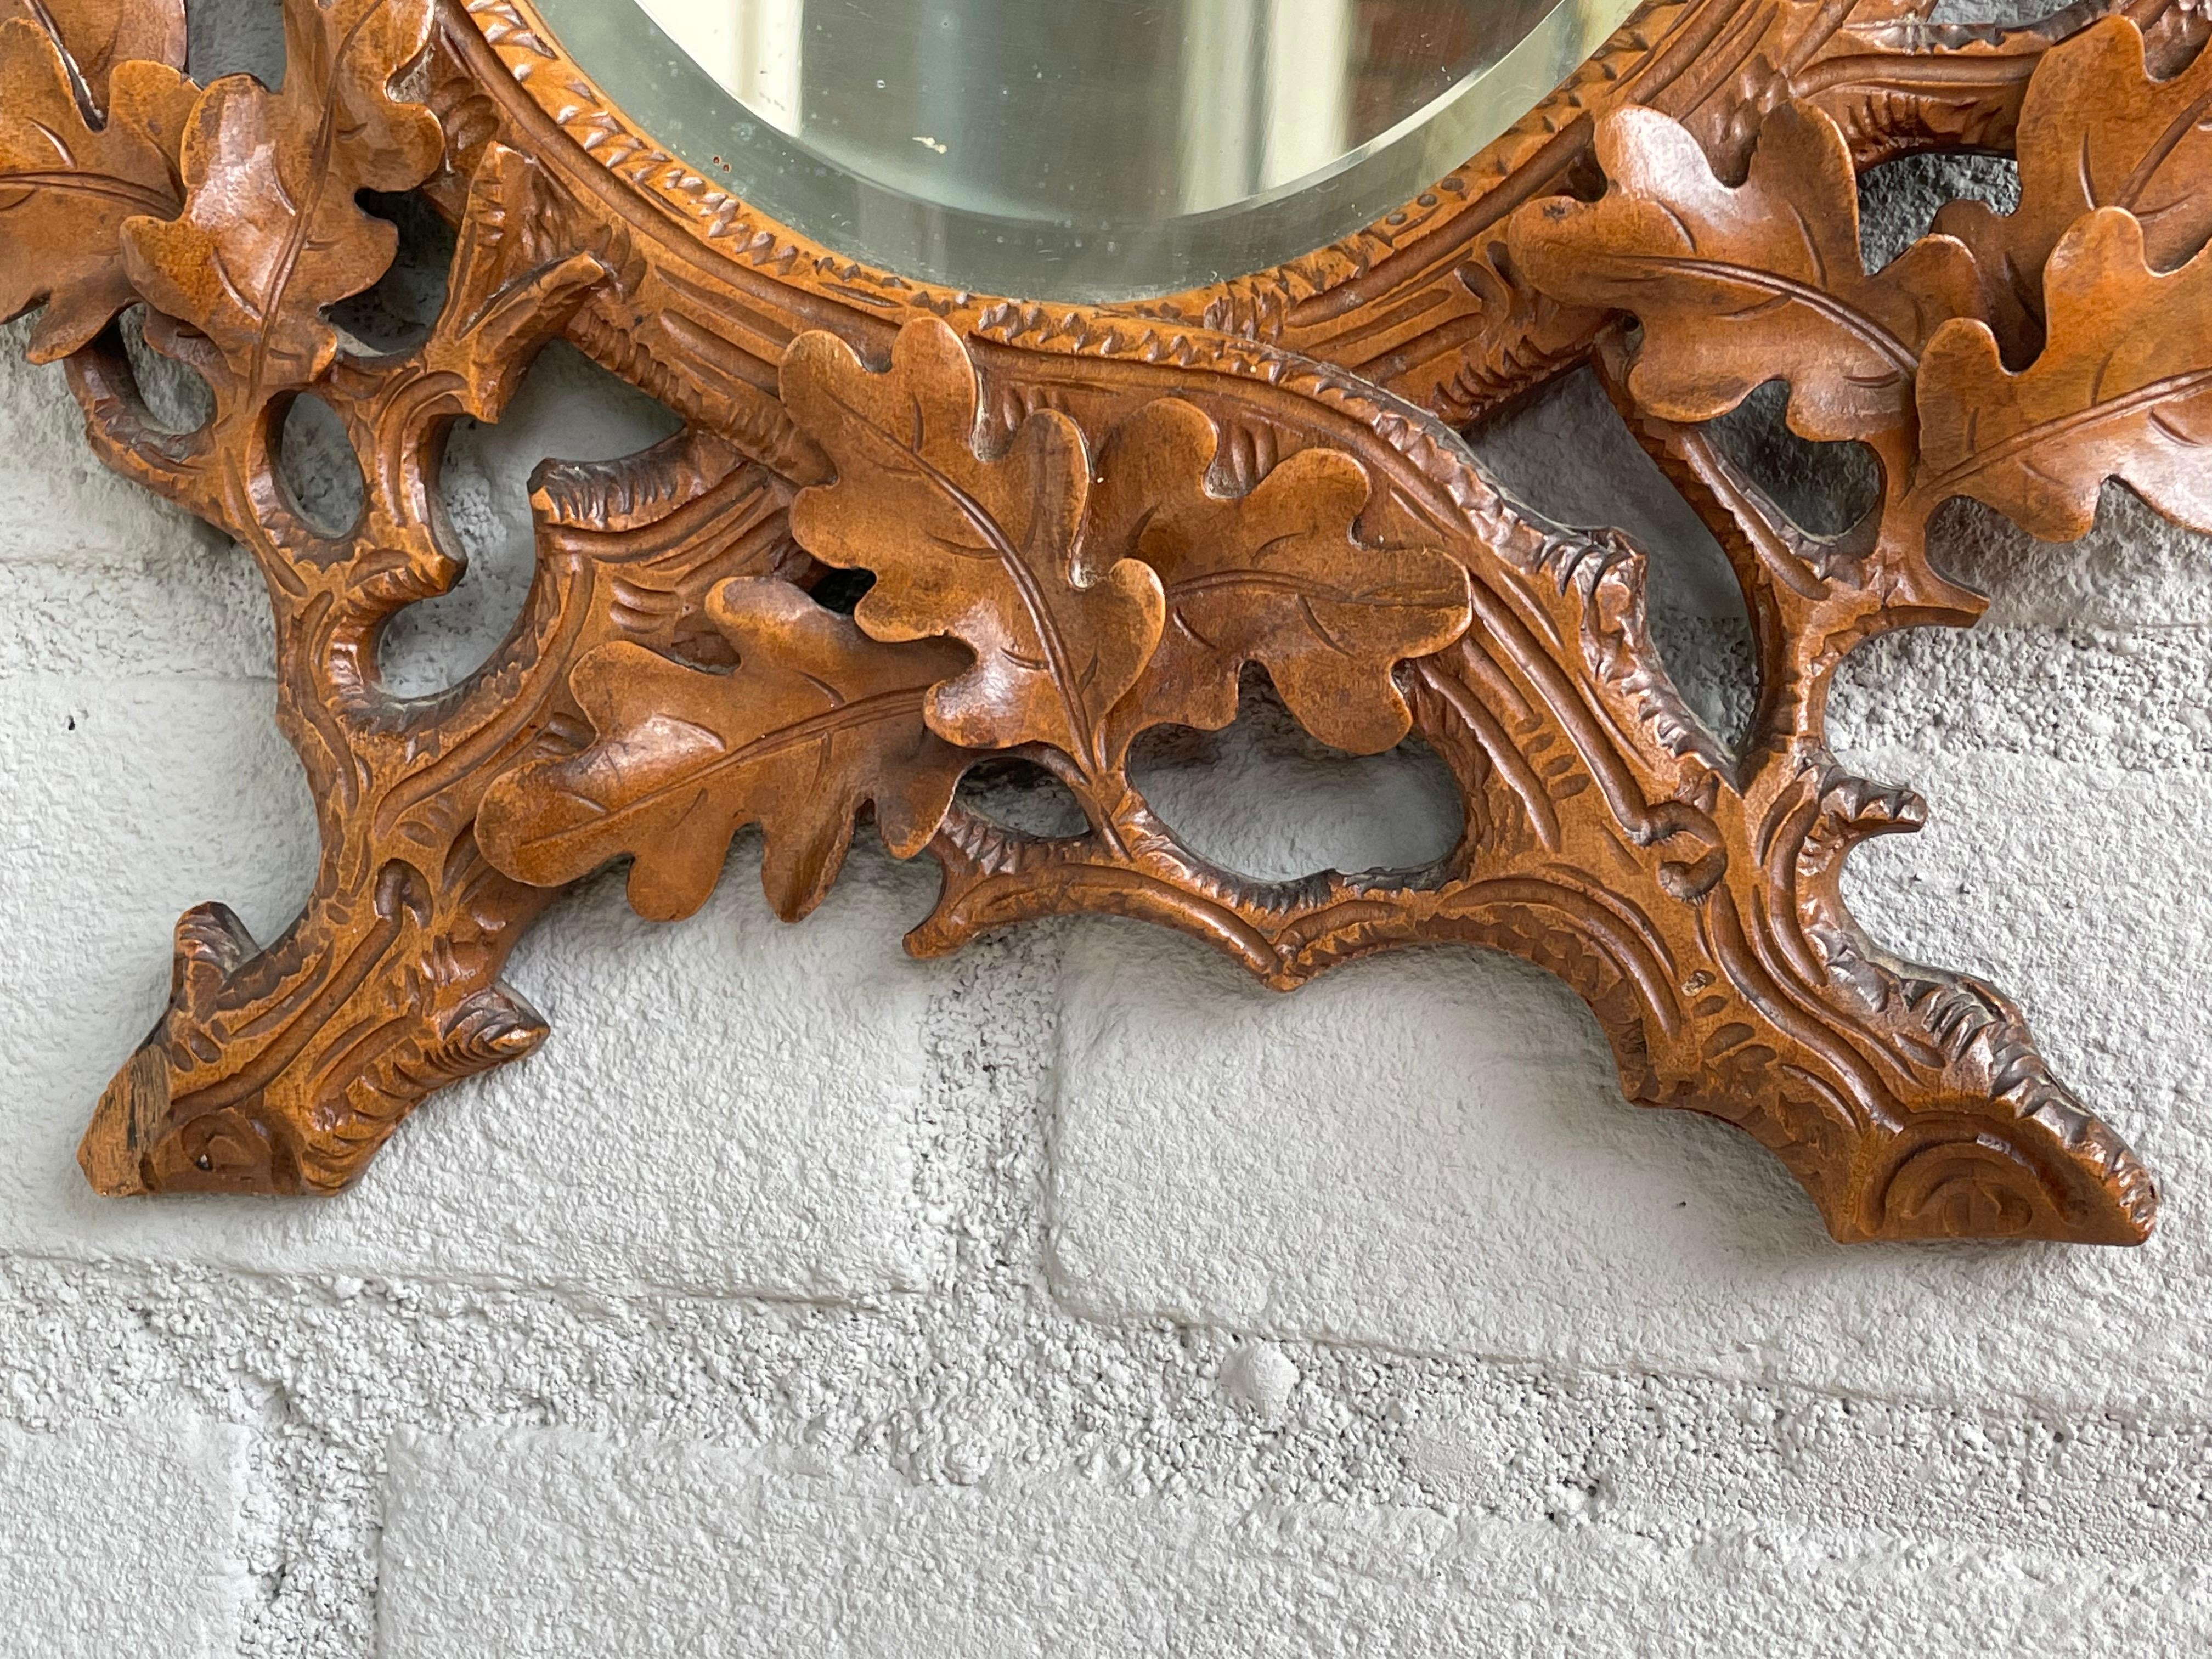 Antique and highly decorative, Swiss Black Forest antique with the original beveled mirror. 

This beautiful, early 20th century, hand carved antique mirror is in superb condition. The Swiss workmanship is of a quality and beauty that you just don't